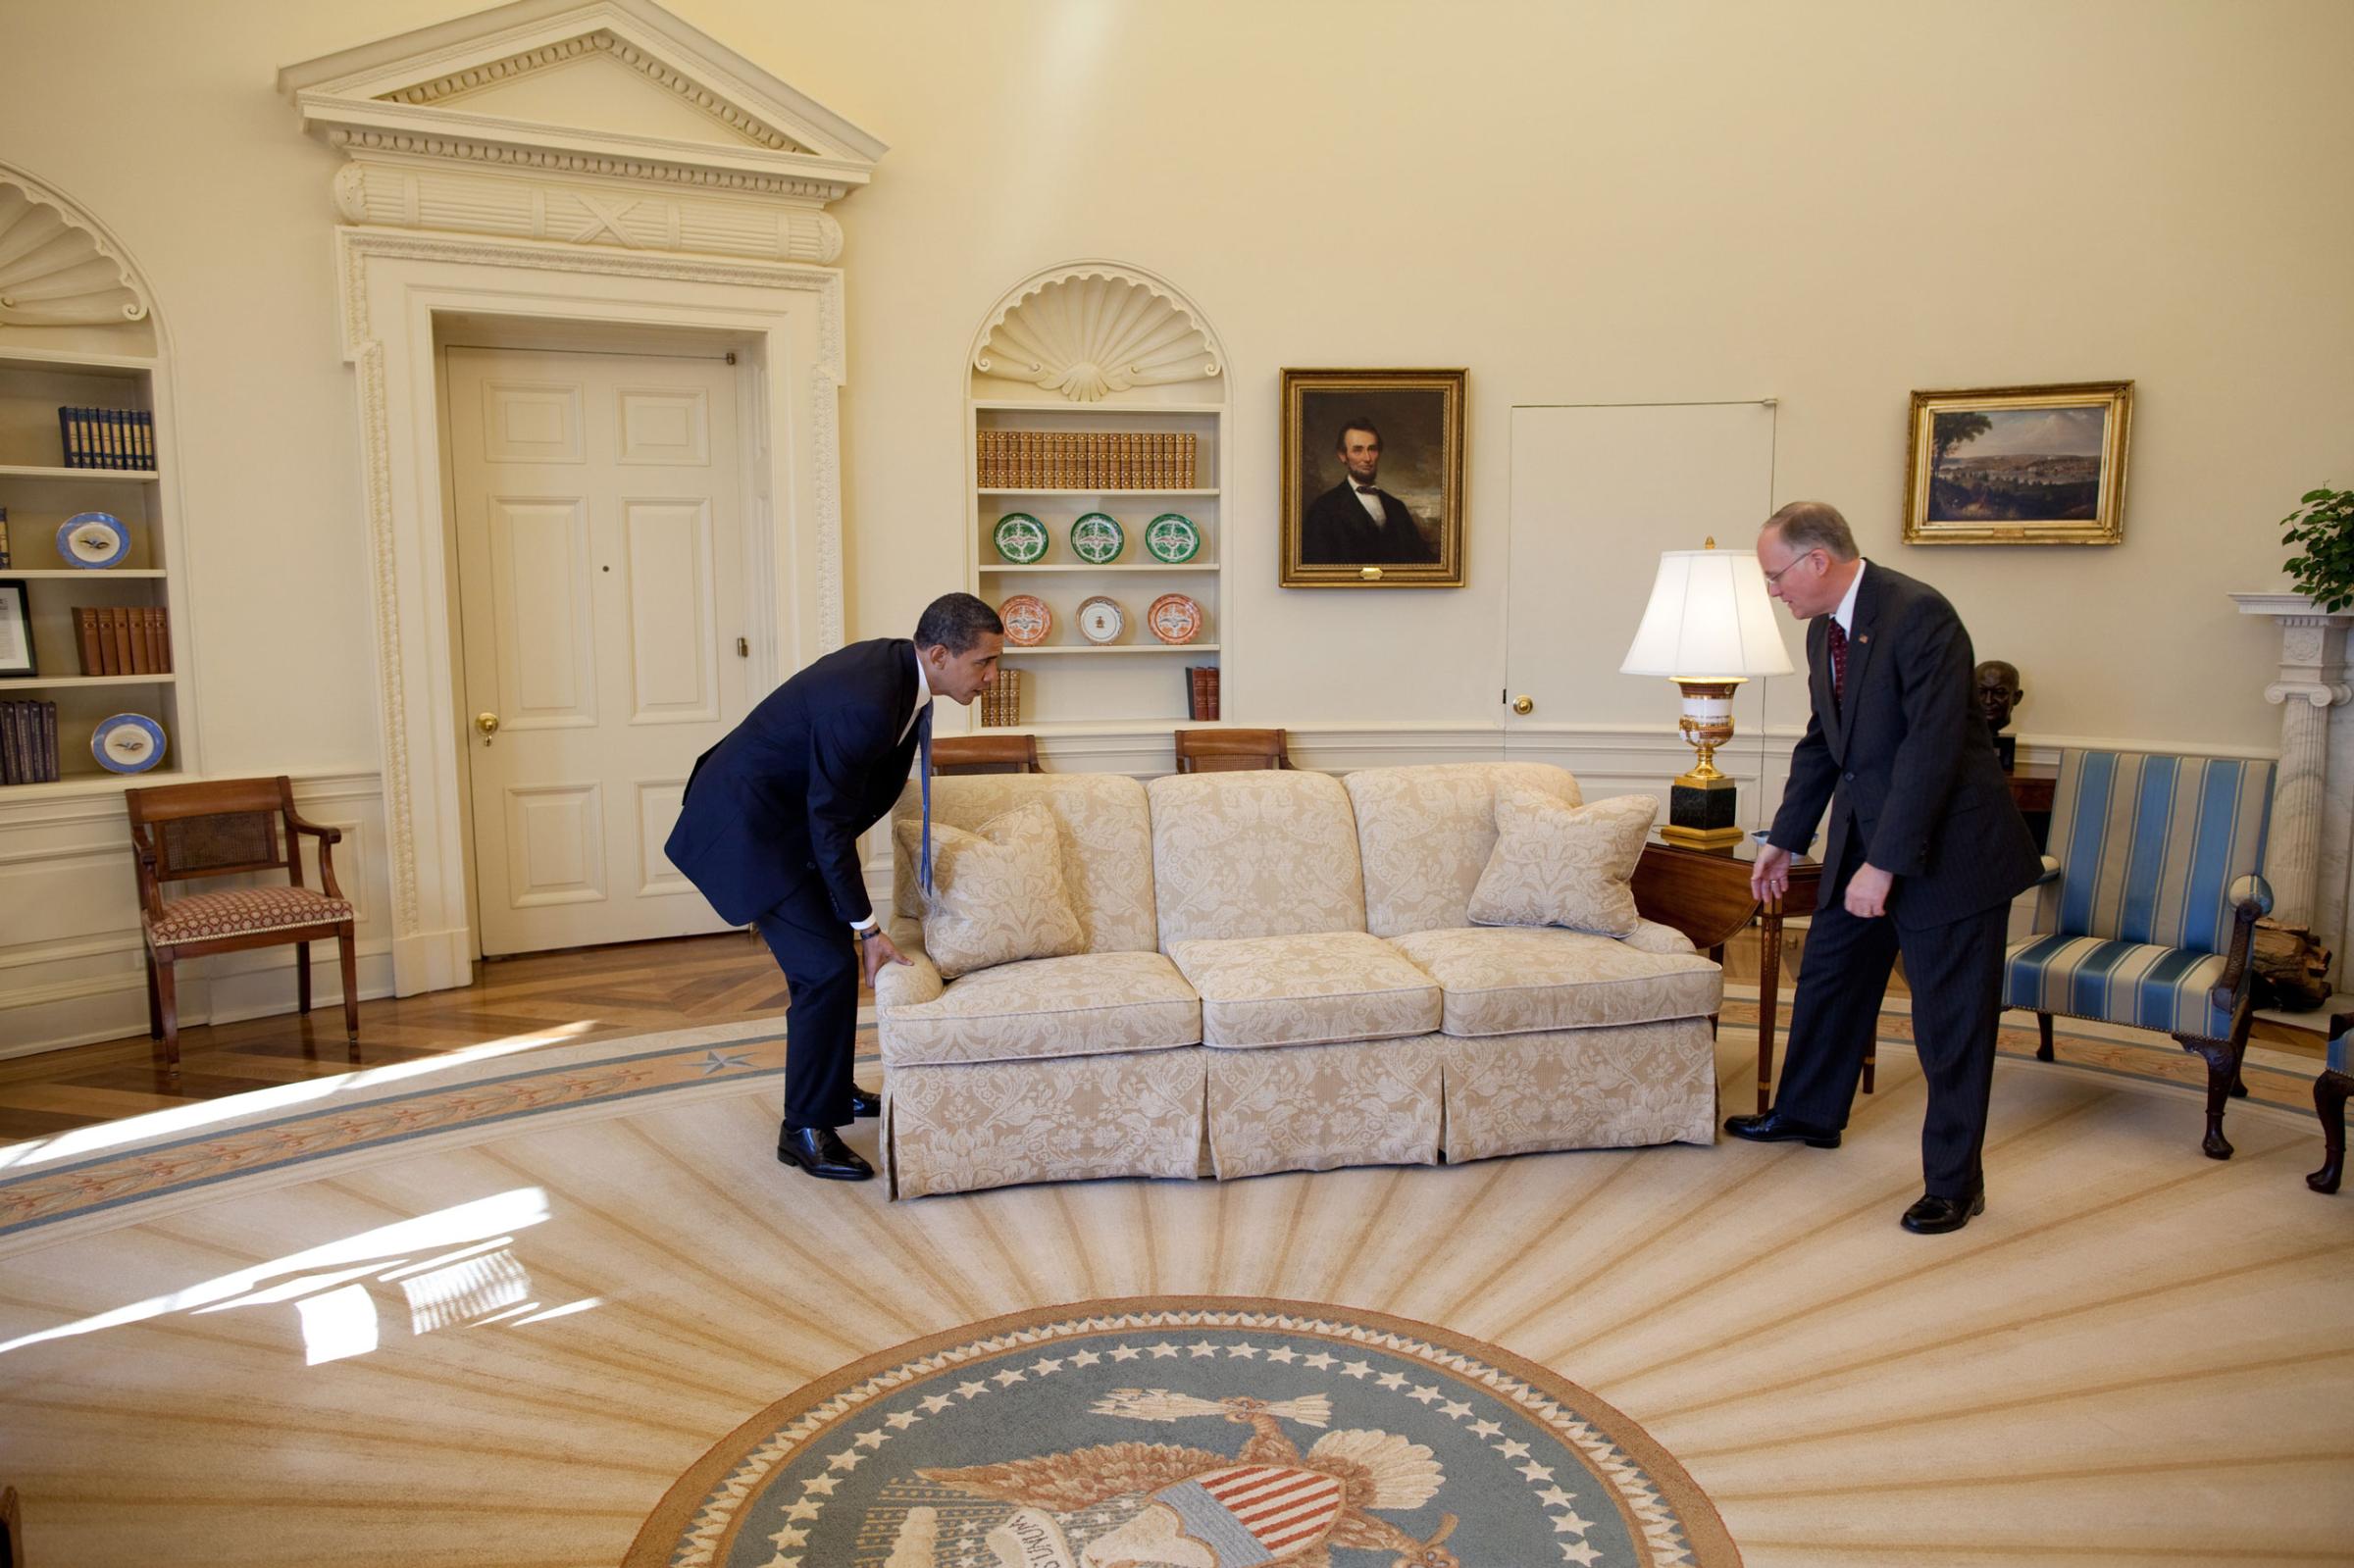 “White House valets had moved the sofas in the Oval Office to accommodate the large number of press photographers that were covering the President’s meeting with Vermont Gov. Jim Douglas. When the photo-op ended, the President said to Gov. Douglas, ‘let’s move the sofas back in place.’ Gov. Douglas didn’t quite know what to do as the President did the heavy lifting. The valets now good-naturedly cringe when they look at this picture because it was their responsibility to move the sofas back in place.”Feb. 2, 2009